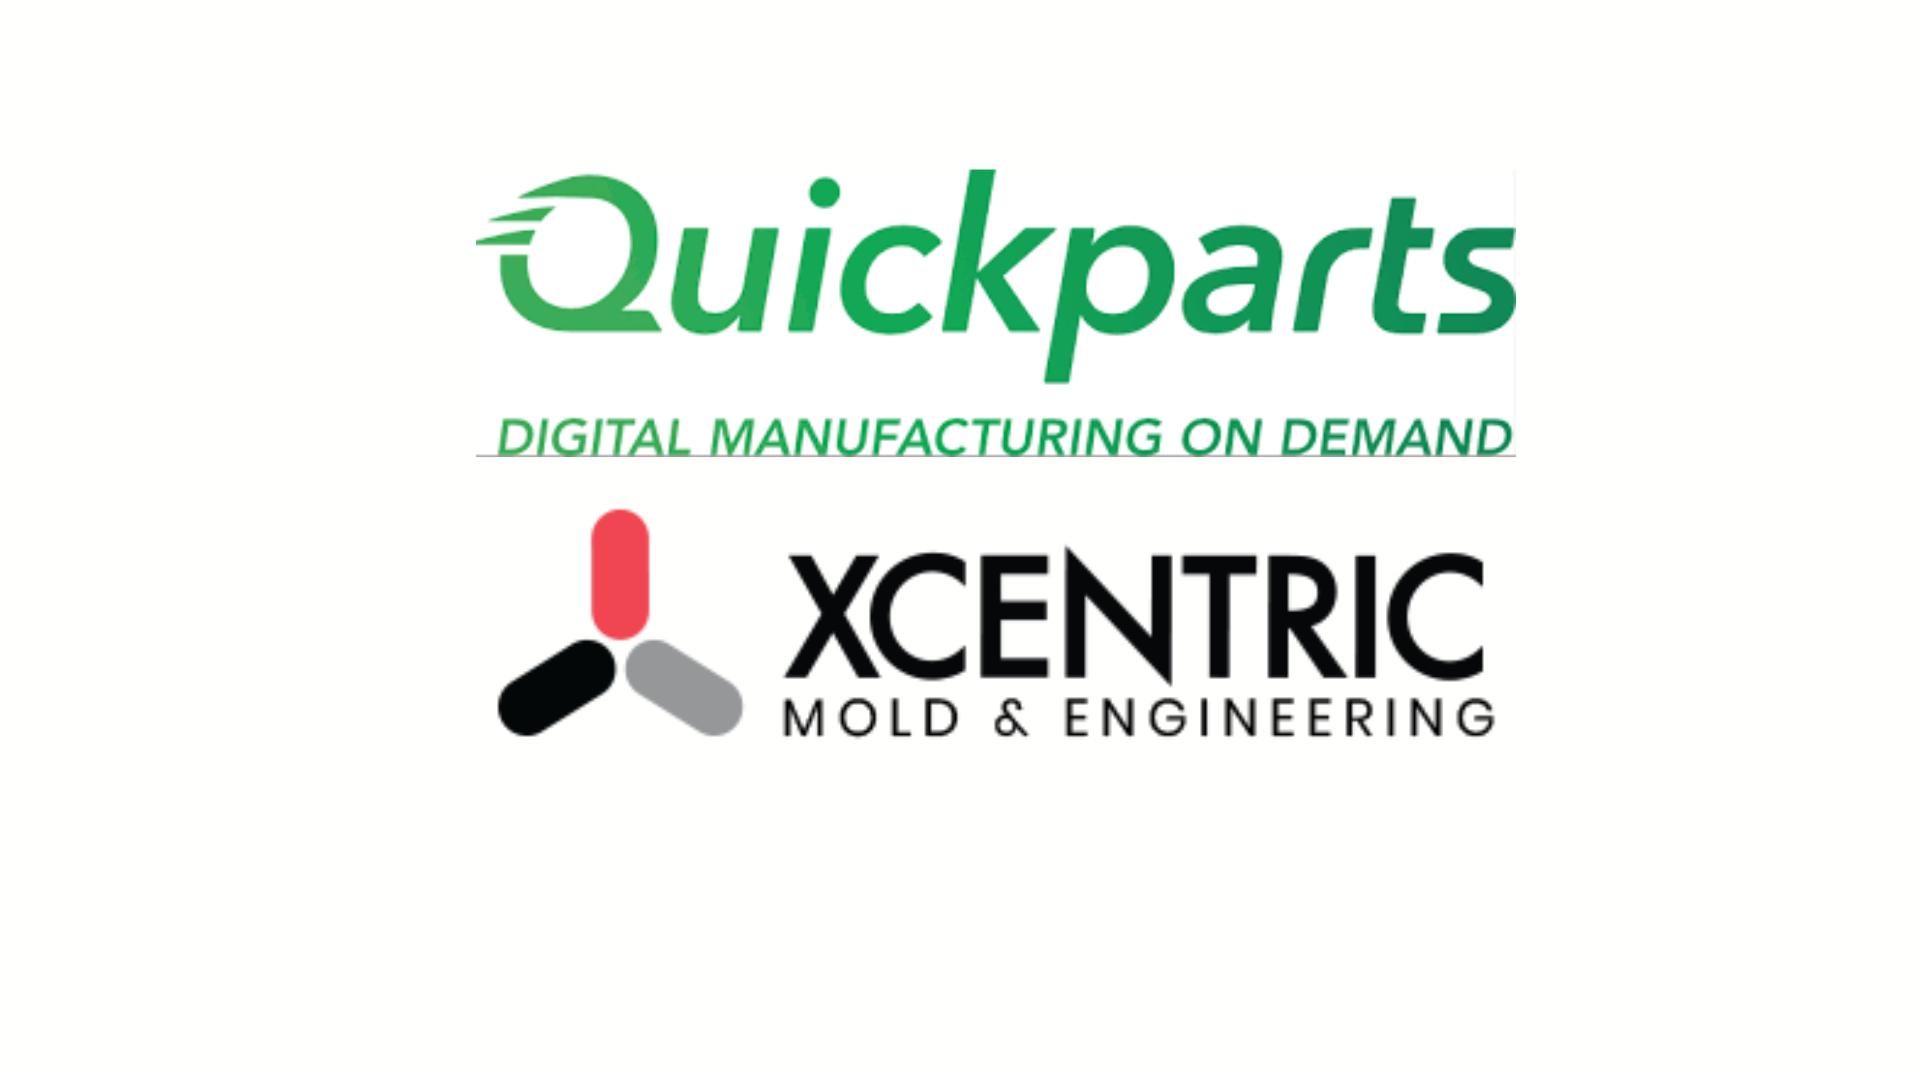 Quickparts announced the acquisition of Xcentric Mold & Engineering an innovator of on-demand digital manufacturing in injection molding and CNC solutions